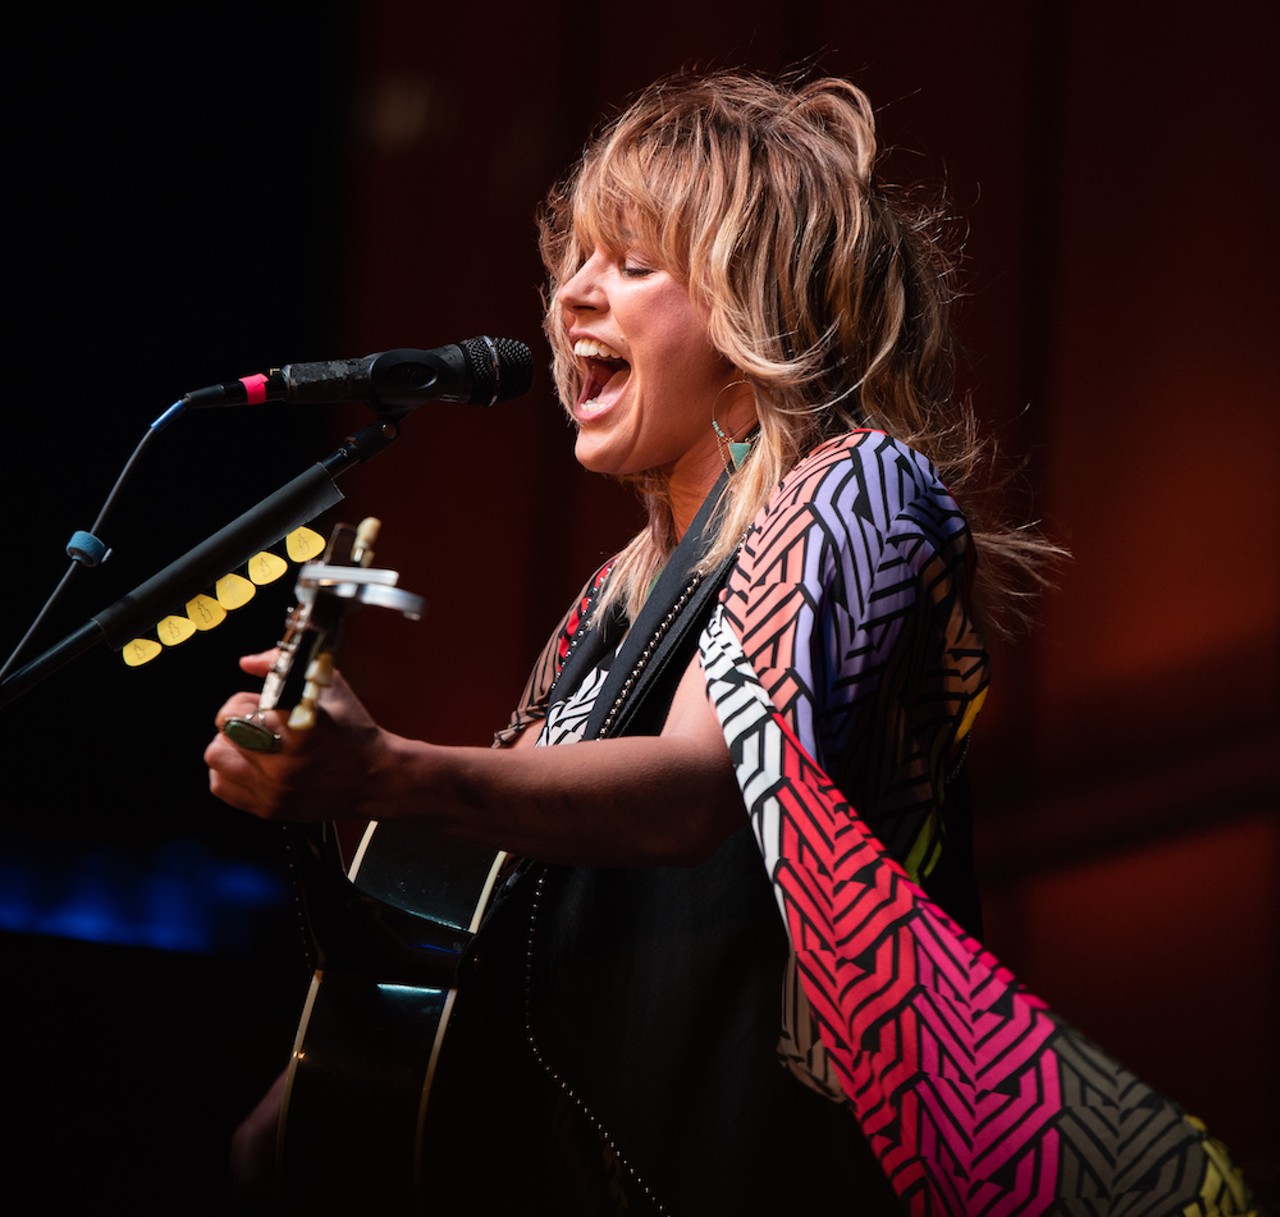 Everything we saw at Grace Potter's intimate set at the Dr. Phillips Center&#146;s Frontyard Festival